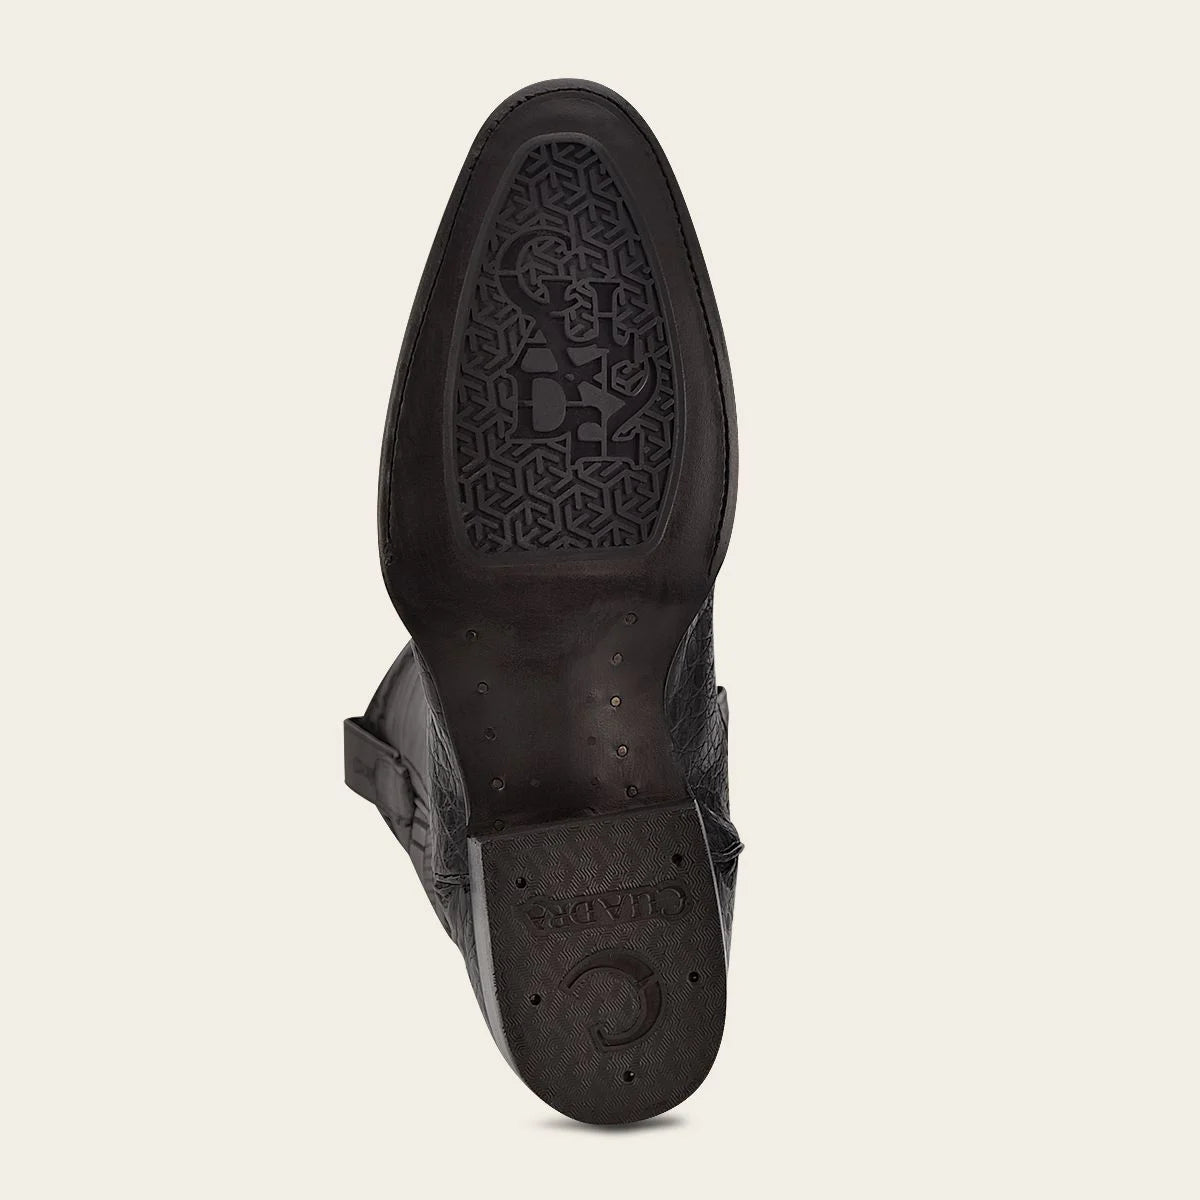 Geometrical engraved black cayman leather boot